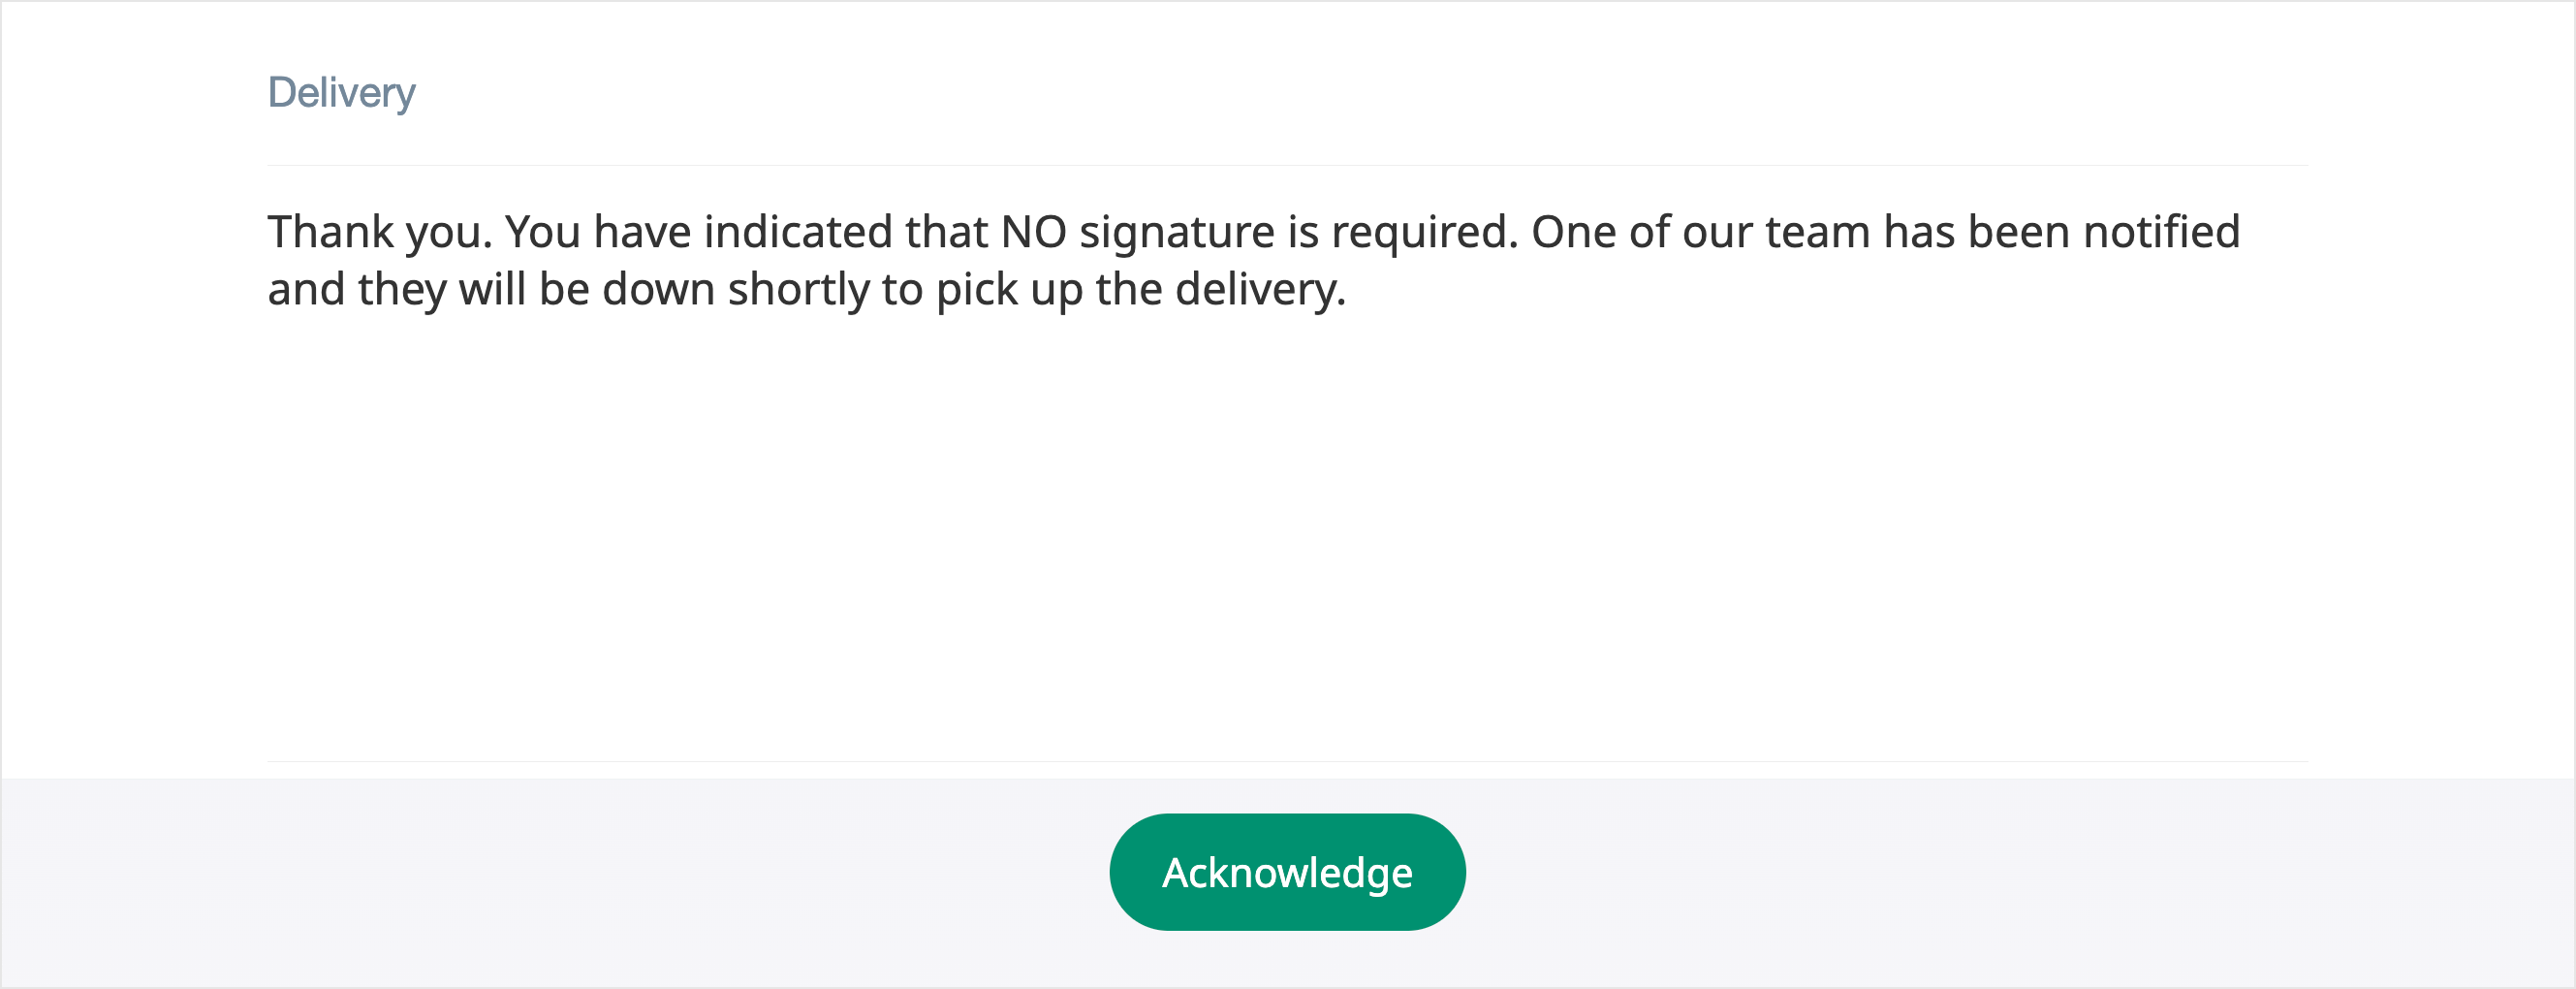 Kiosk-Delivery-Acknowledge.png